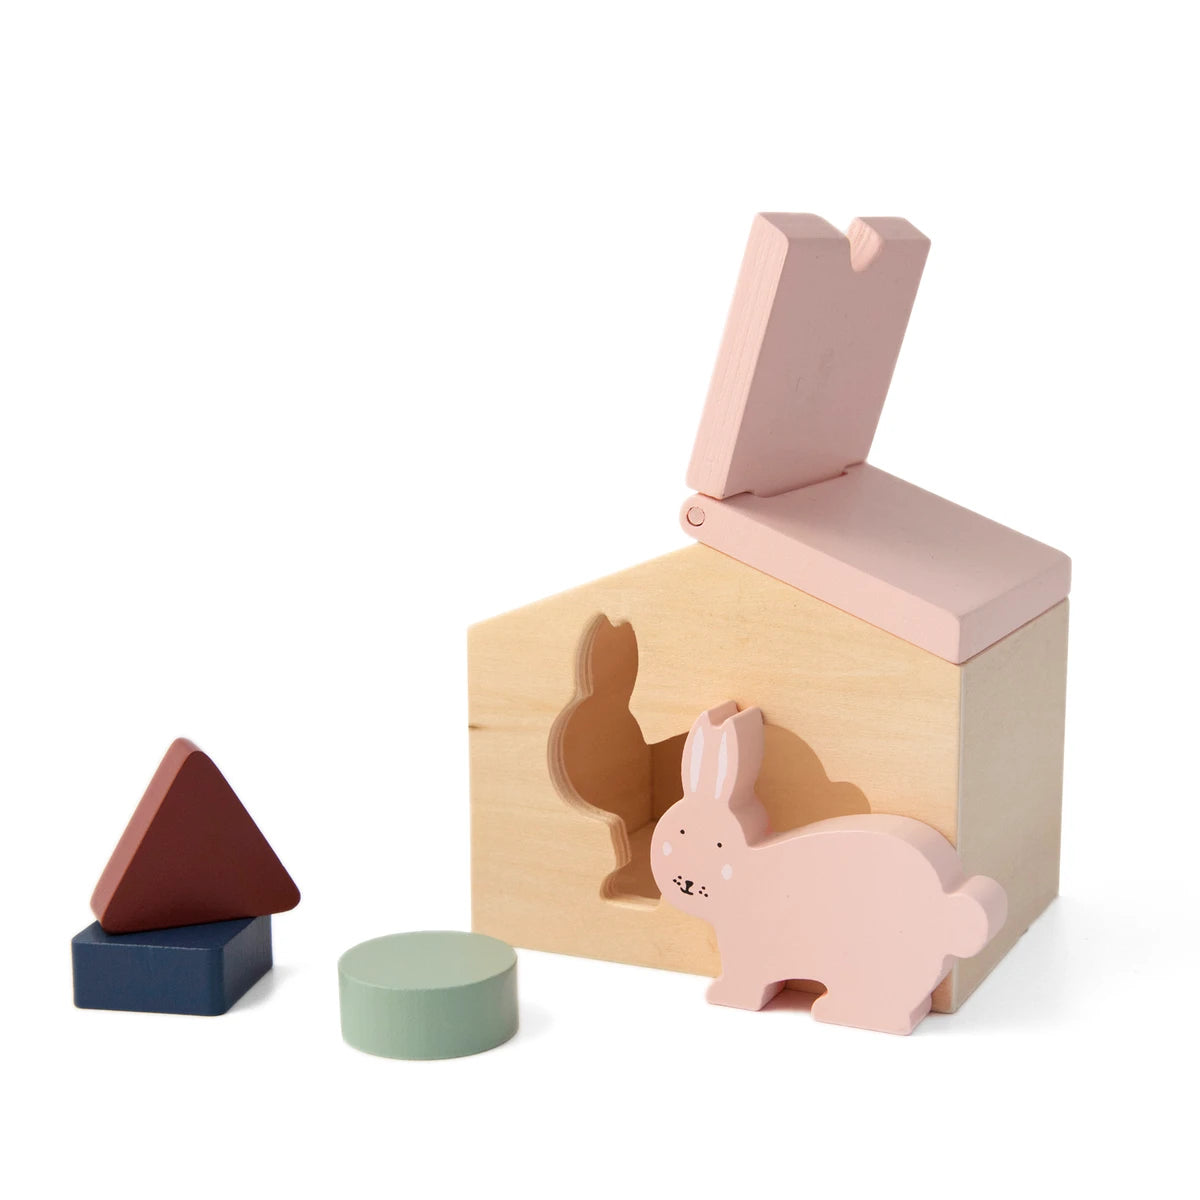 An image of Kids Wooden House - Children's Wooden House - Wooden Toys | Trixie Mrs. Rabbit